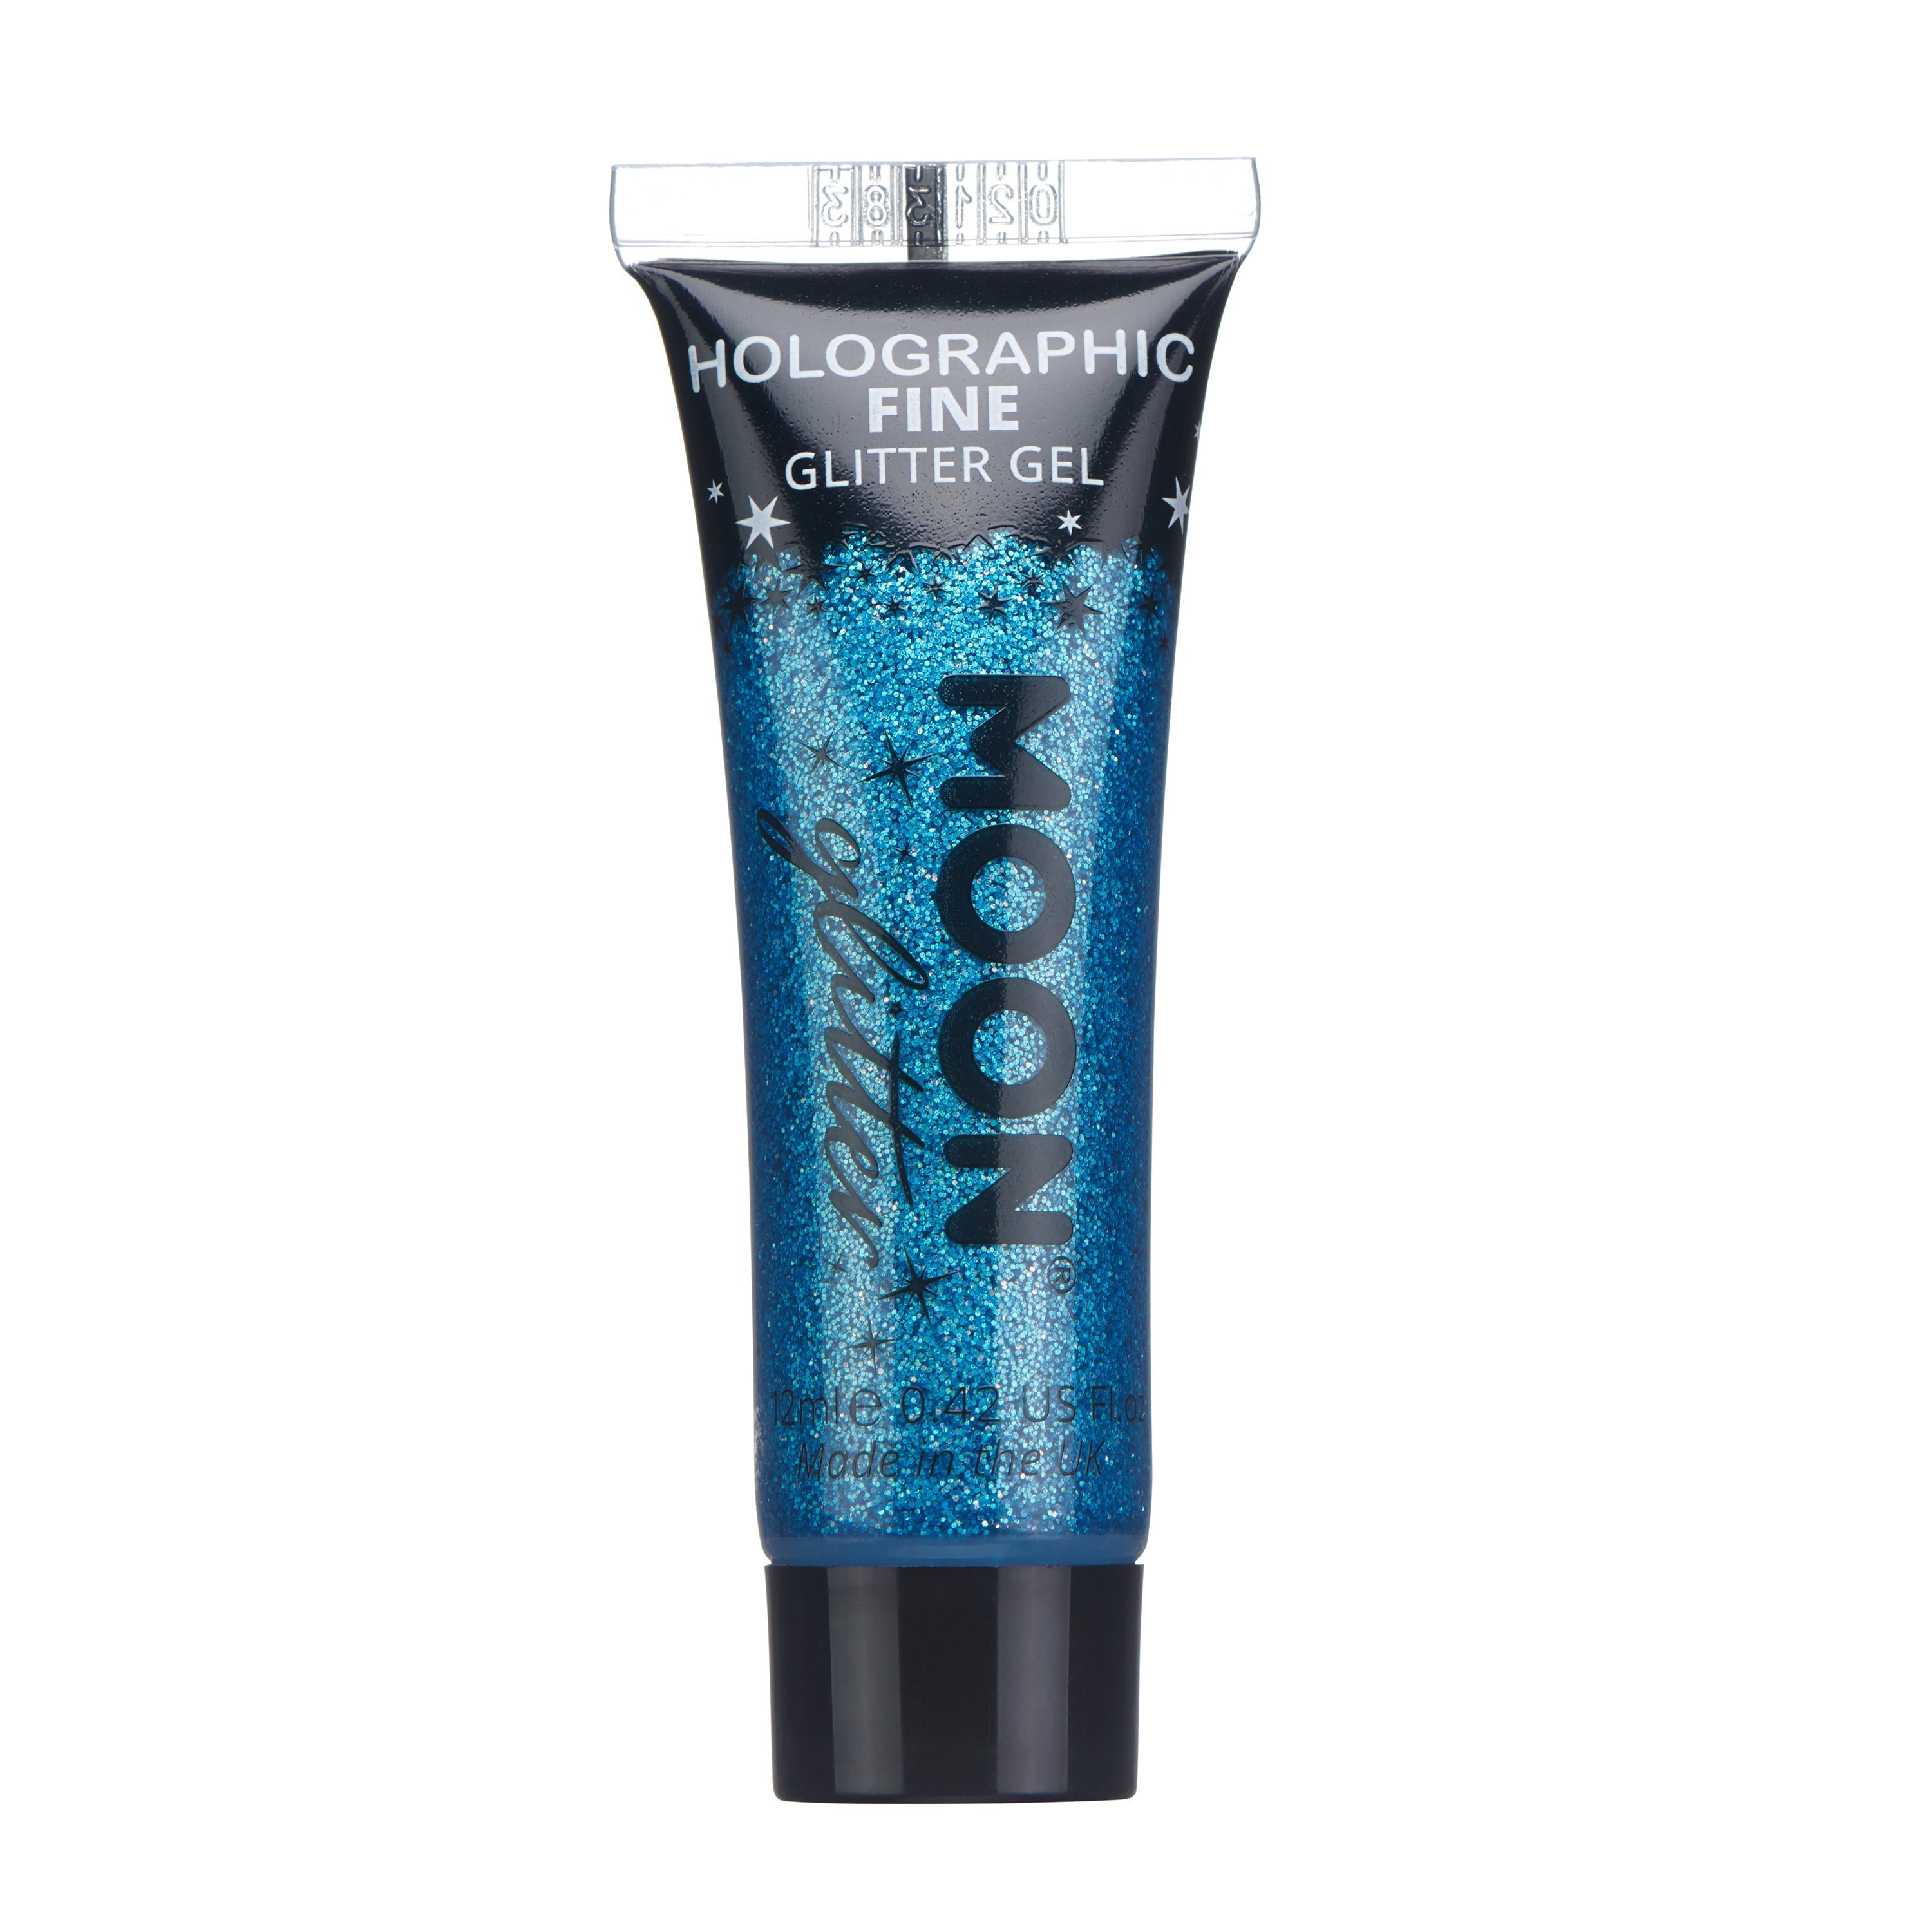 Blue - Holographic Fine Face & Body Glitter Gel, 12mL. Cosmetically certified, FDA & Health Canada compliant, cruelty free and vegan.